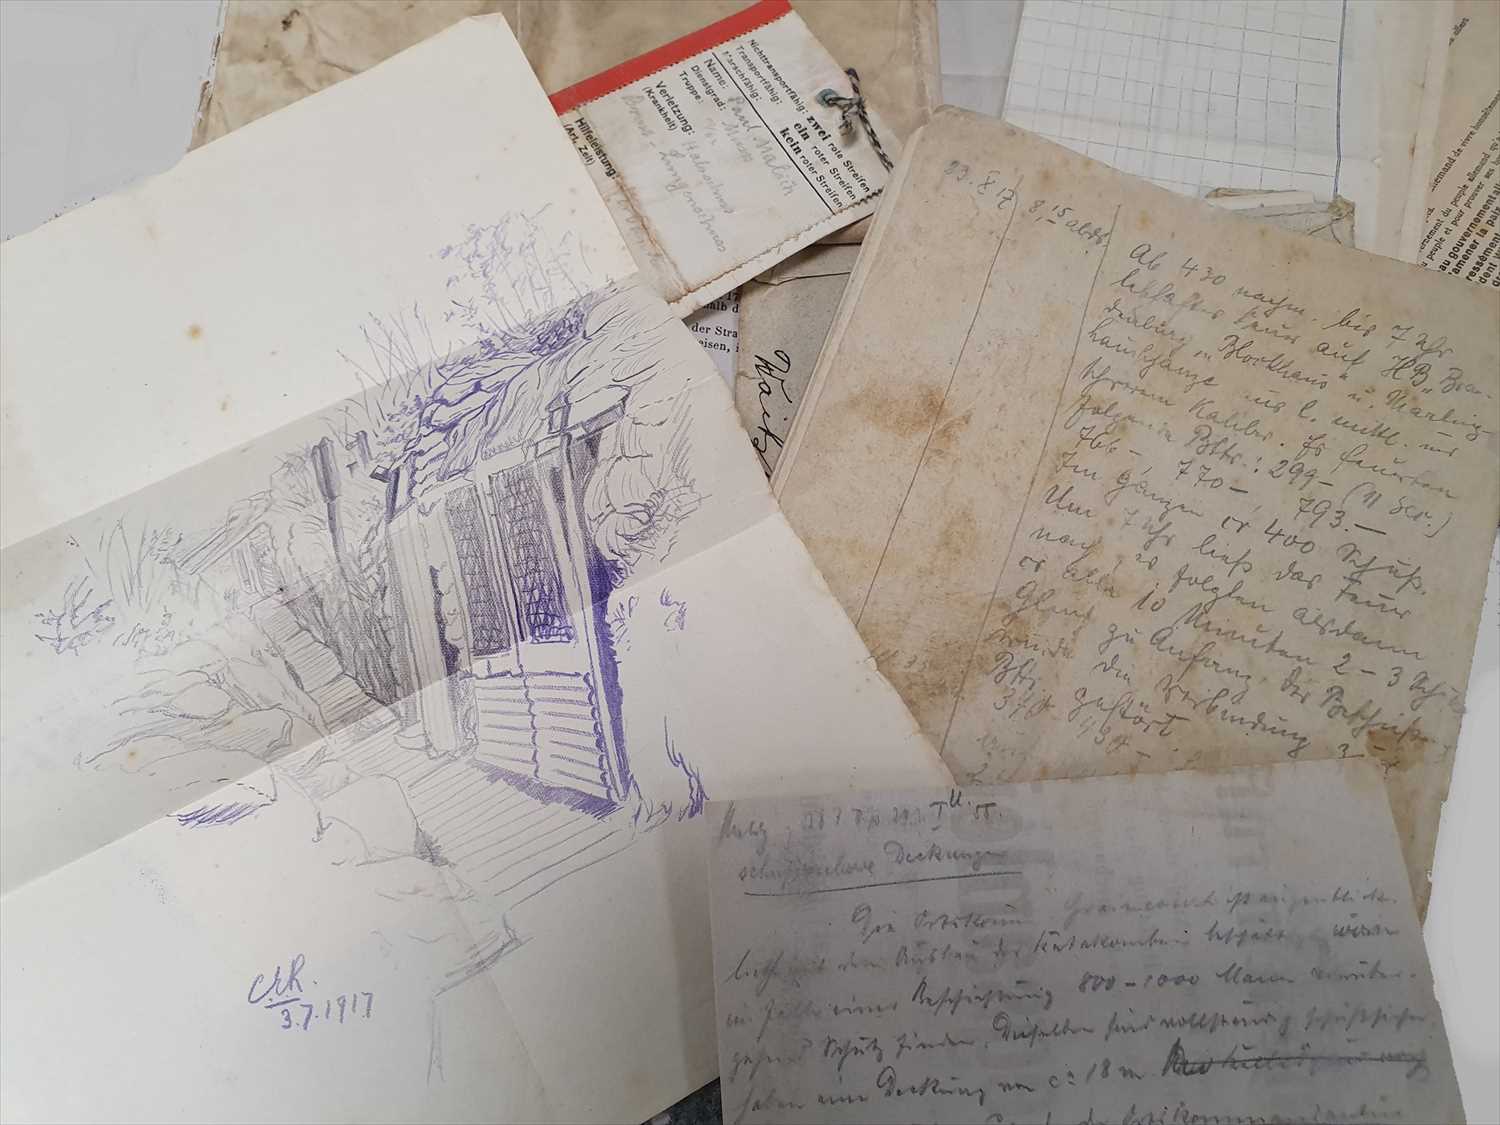 A collection of WW1 documents recovered from a dead German soldier at the Western front, 1917